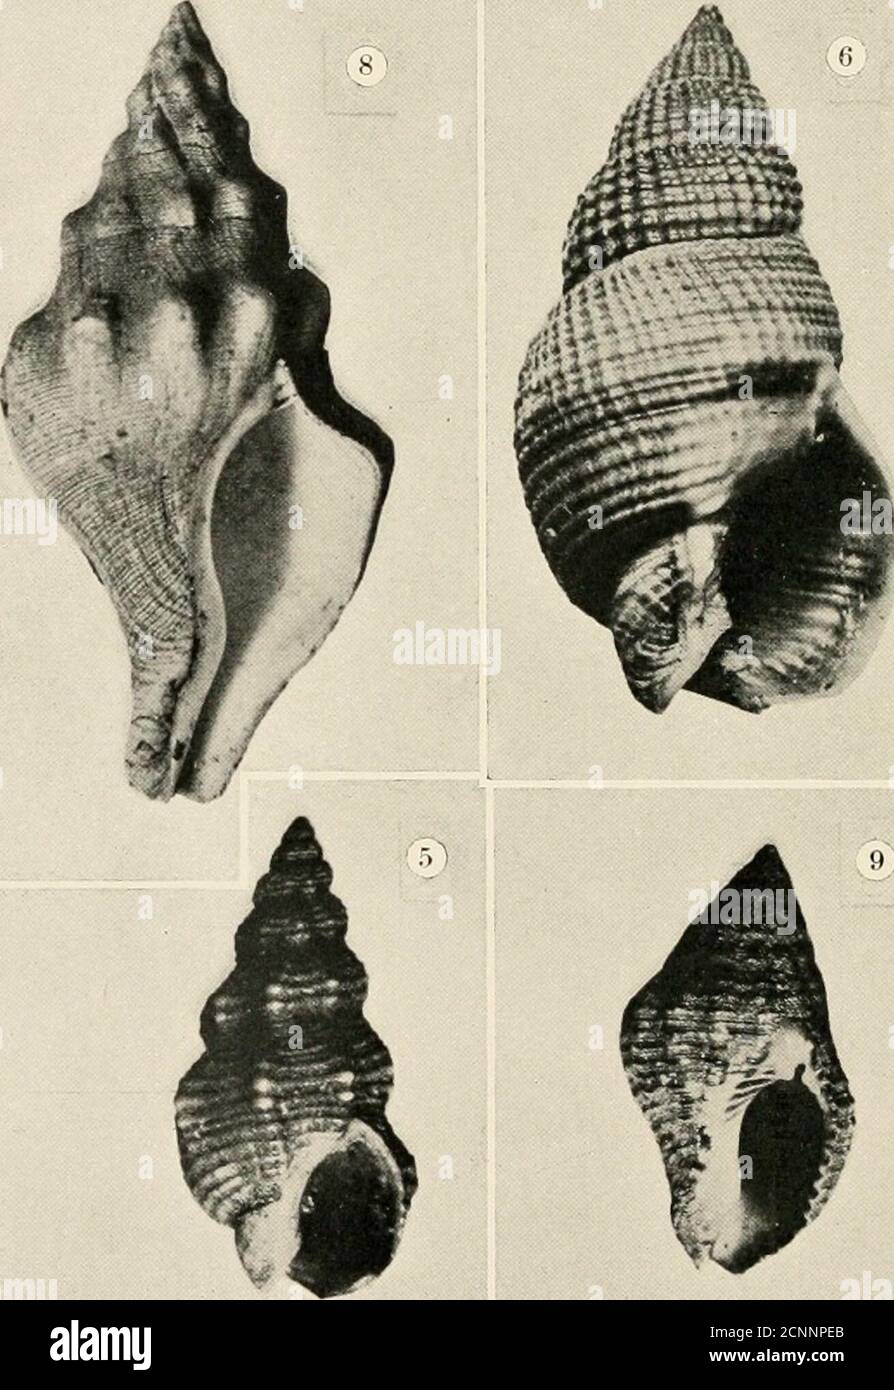 . The sea-beach at ebb-tide : a guide to the study of the seaweeds and the lower animal life found between tidemarks . PLATE LXXIV. 1, Colunibella mercatoria, enlarged. 4, Nassa fossata, about natural size. 2, Columbella (Amphissa) corrugata, en- 5, Nassa mendica, enlarged. larged. 6, Nassa perpinguis, enlarged. 3, Columbella (Astyris) gausapata, much 7, Nassa tegula, enlarged. enlarged. 8, Siphonalia kellettii, reduced.9, Tritonidea tincta. GASTEROPODS 389 lines on a white background, or of white splotches on a brownish back-ground. (Plate LXXIV.) C. (Anachis) &lt;n&lt;n-a, and the variety C. Stock Photo